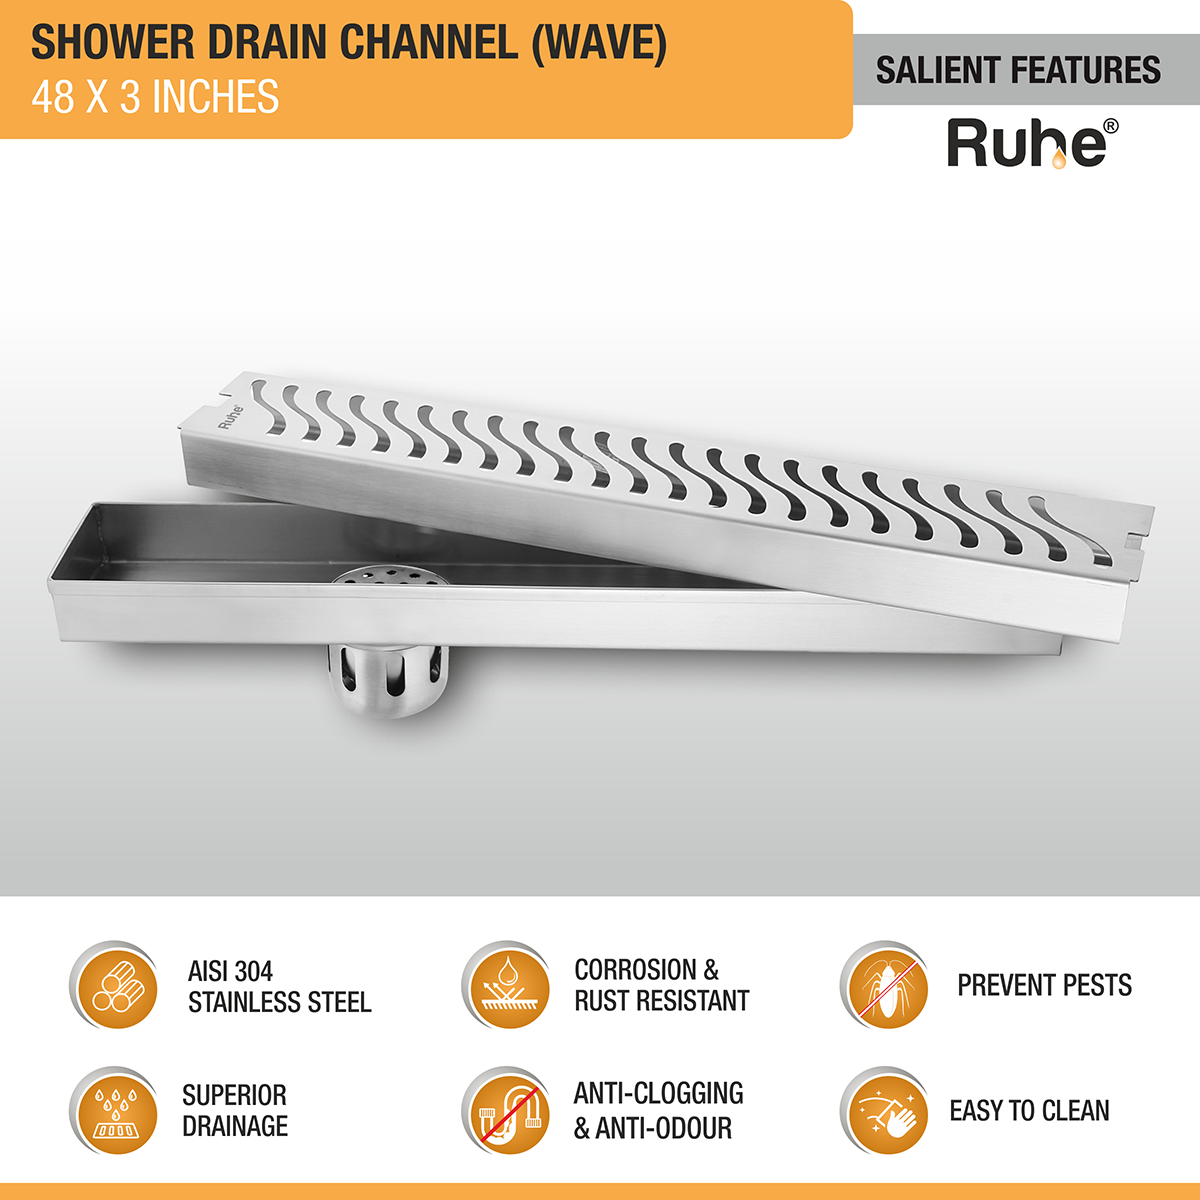 Wave Shower Drain Channel (48 X 3 Inches) with Cockroach Trap (304 Grade) features